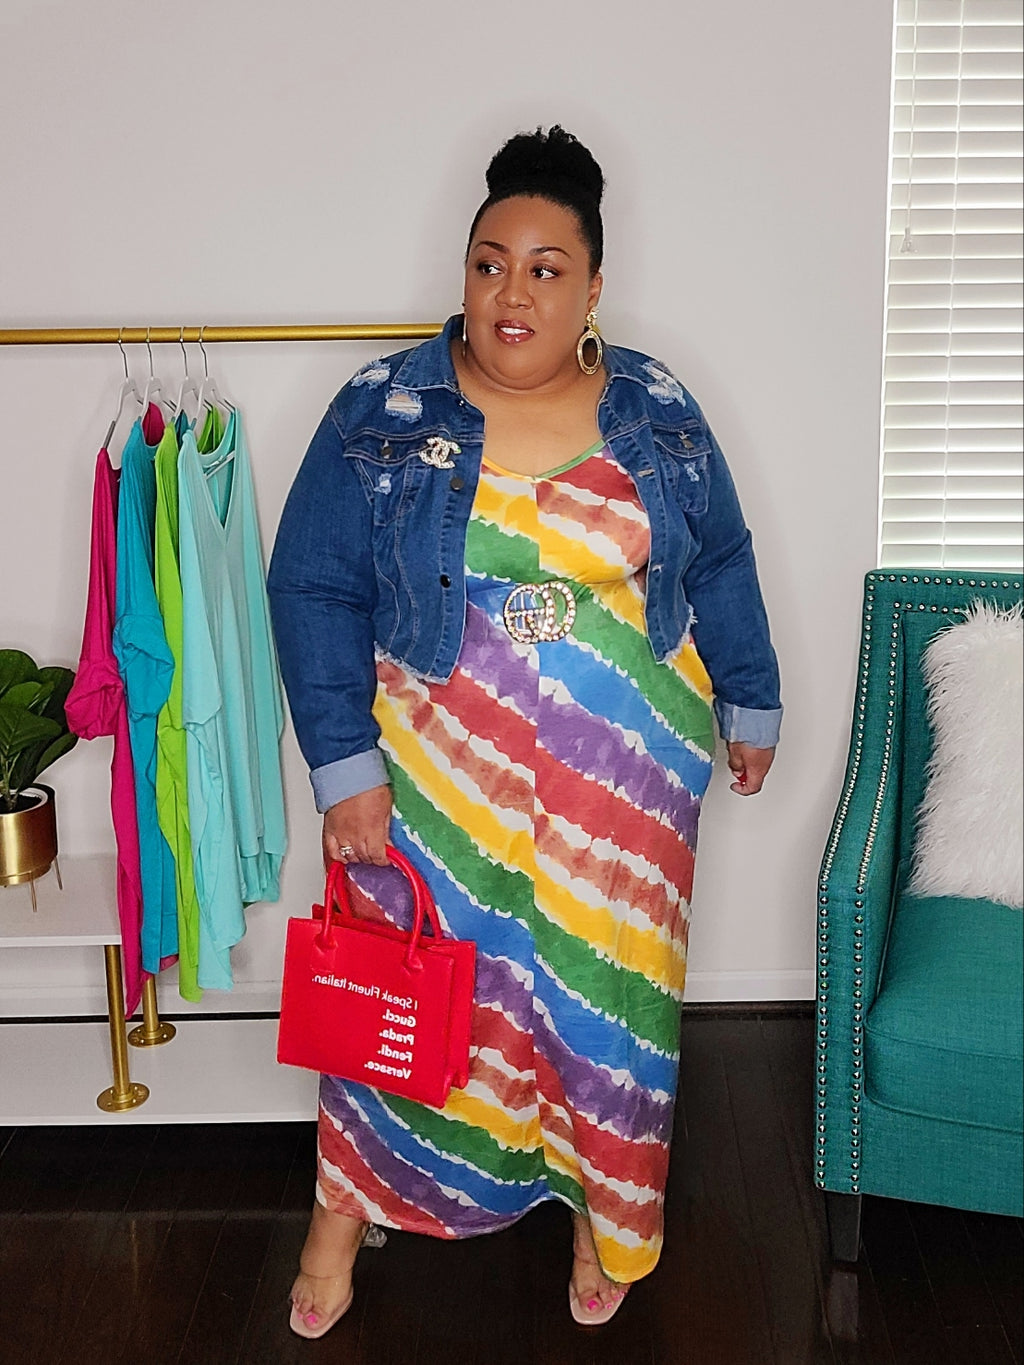 Rainbow brite maxi dress is a fun, colorful way to celebrate pride month